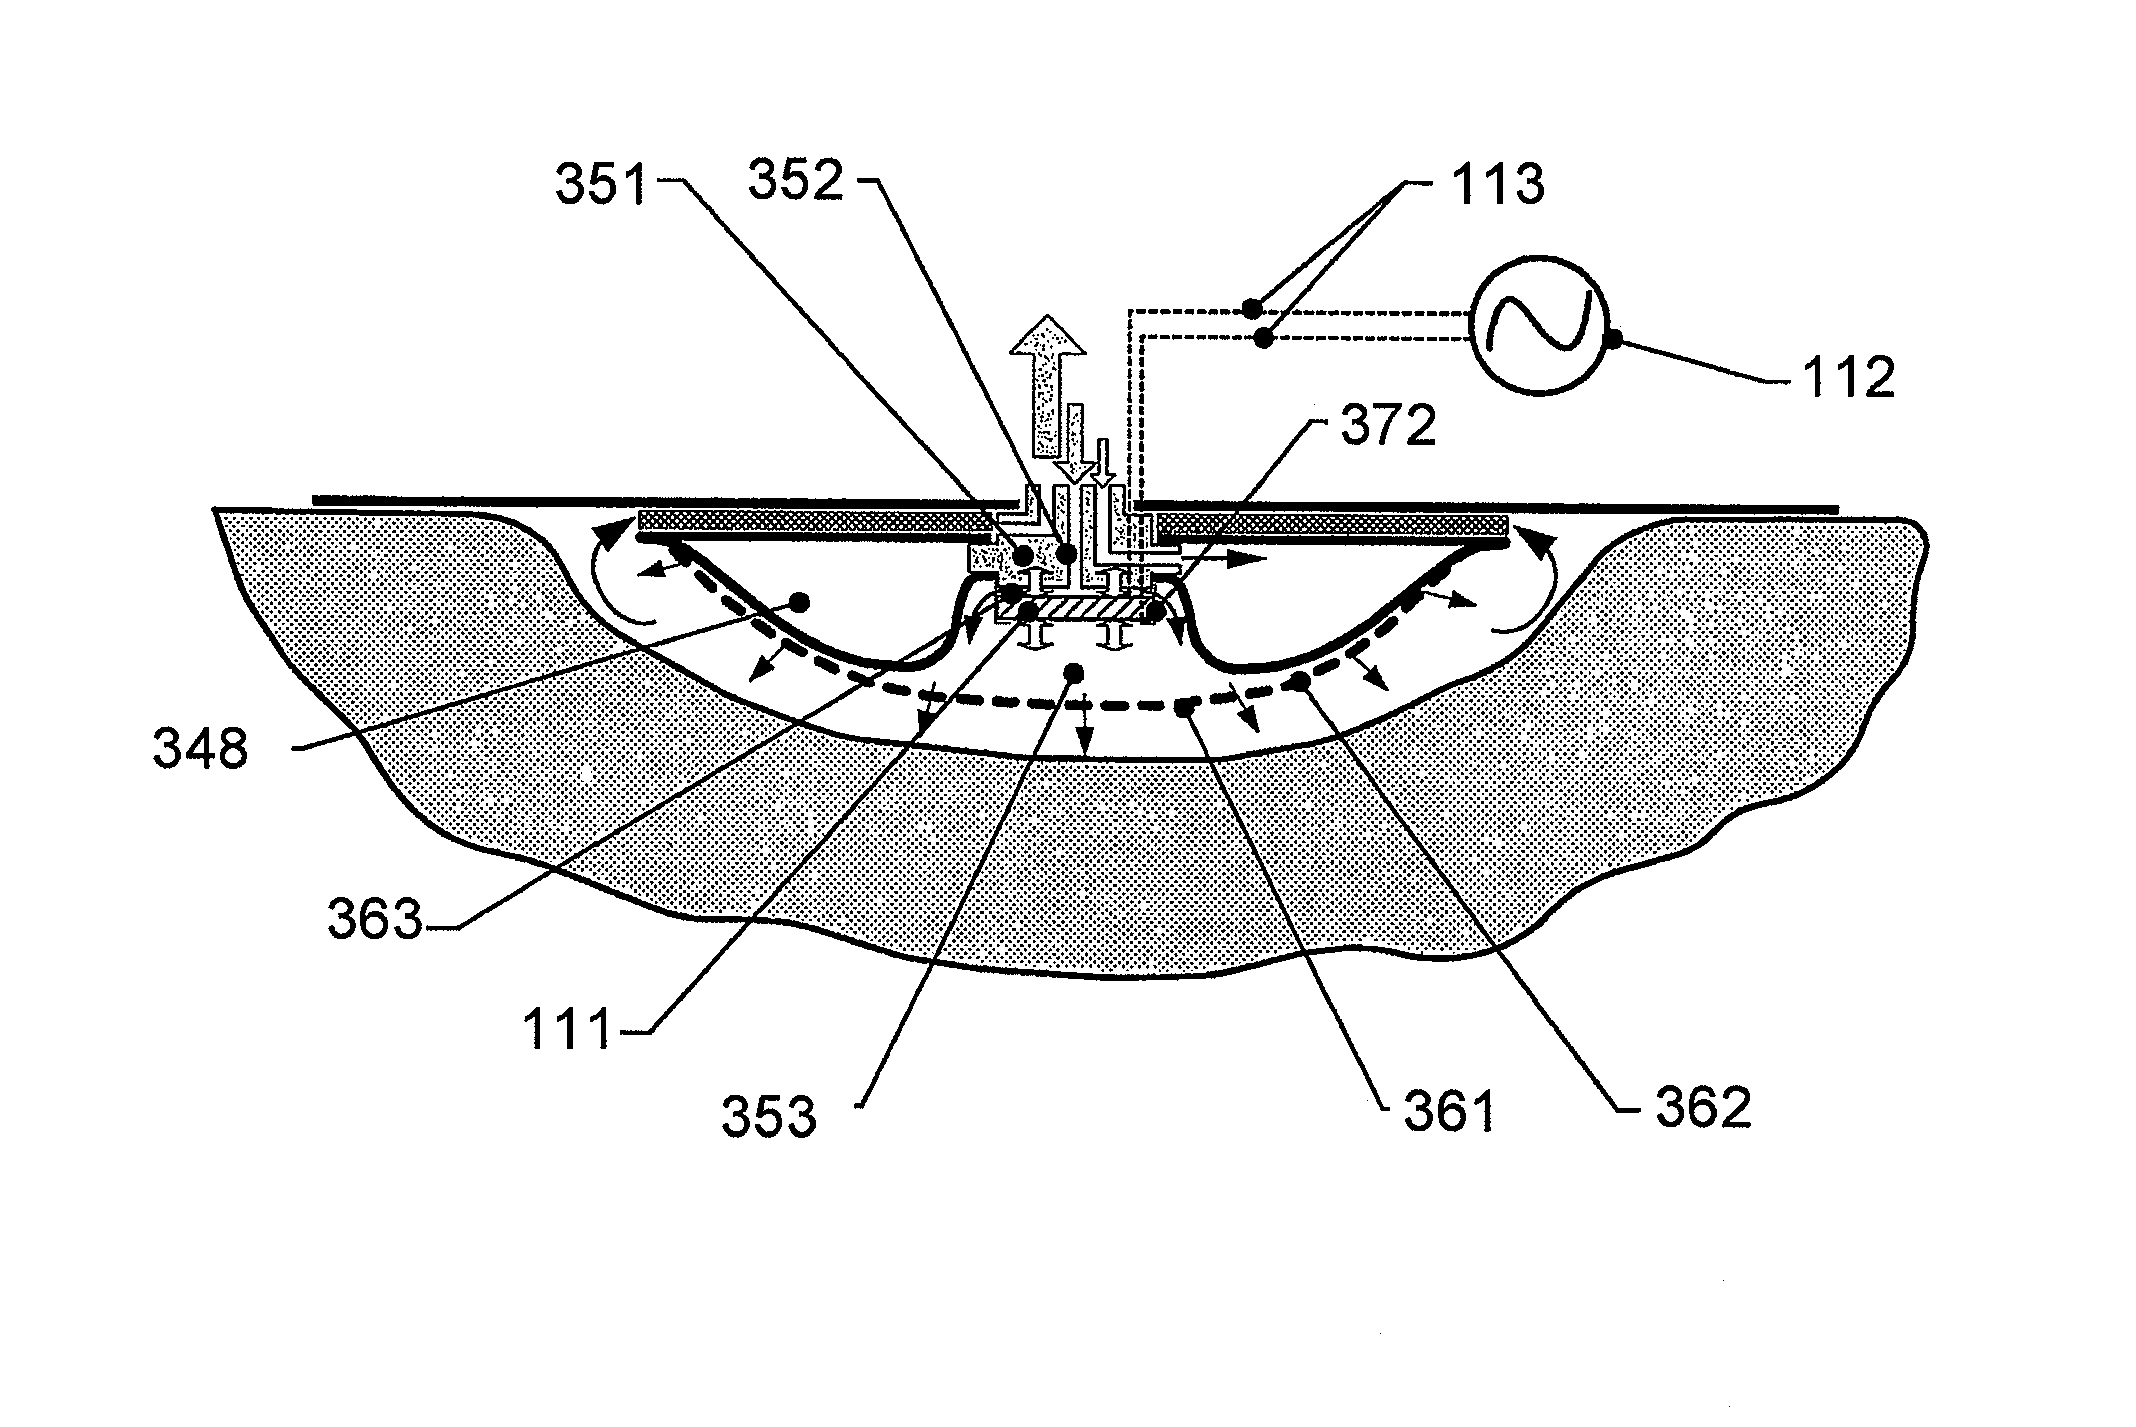 Wound treatment apparatus and method